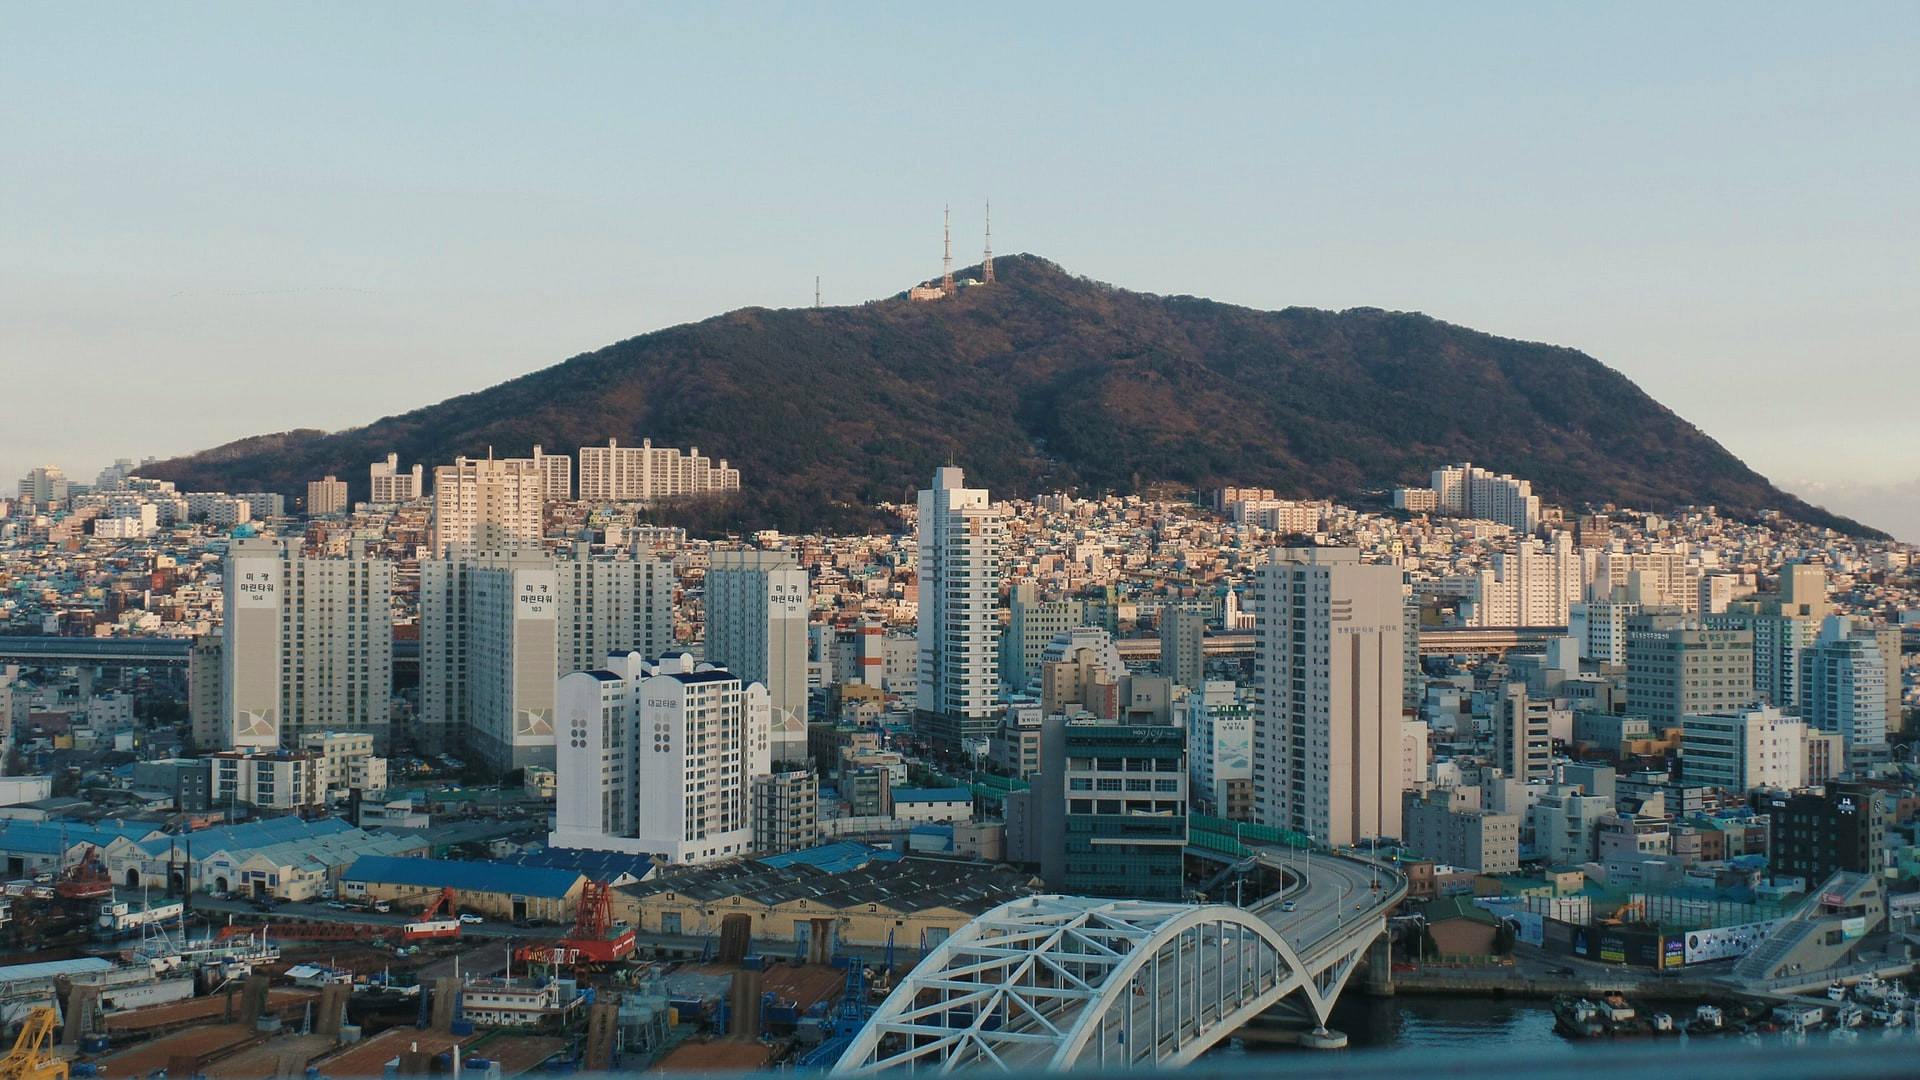 Coliving in Busan